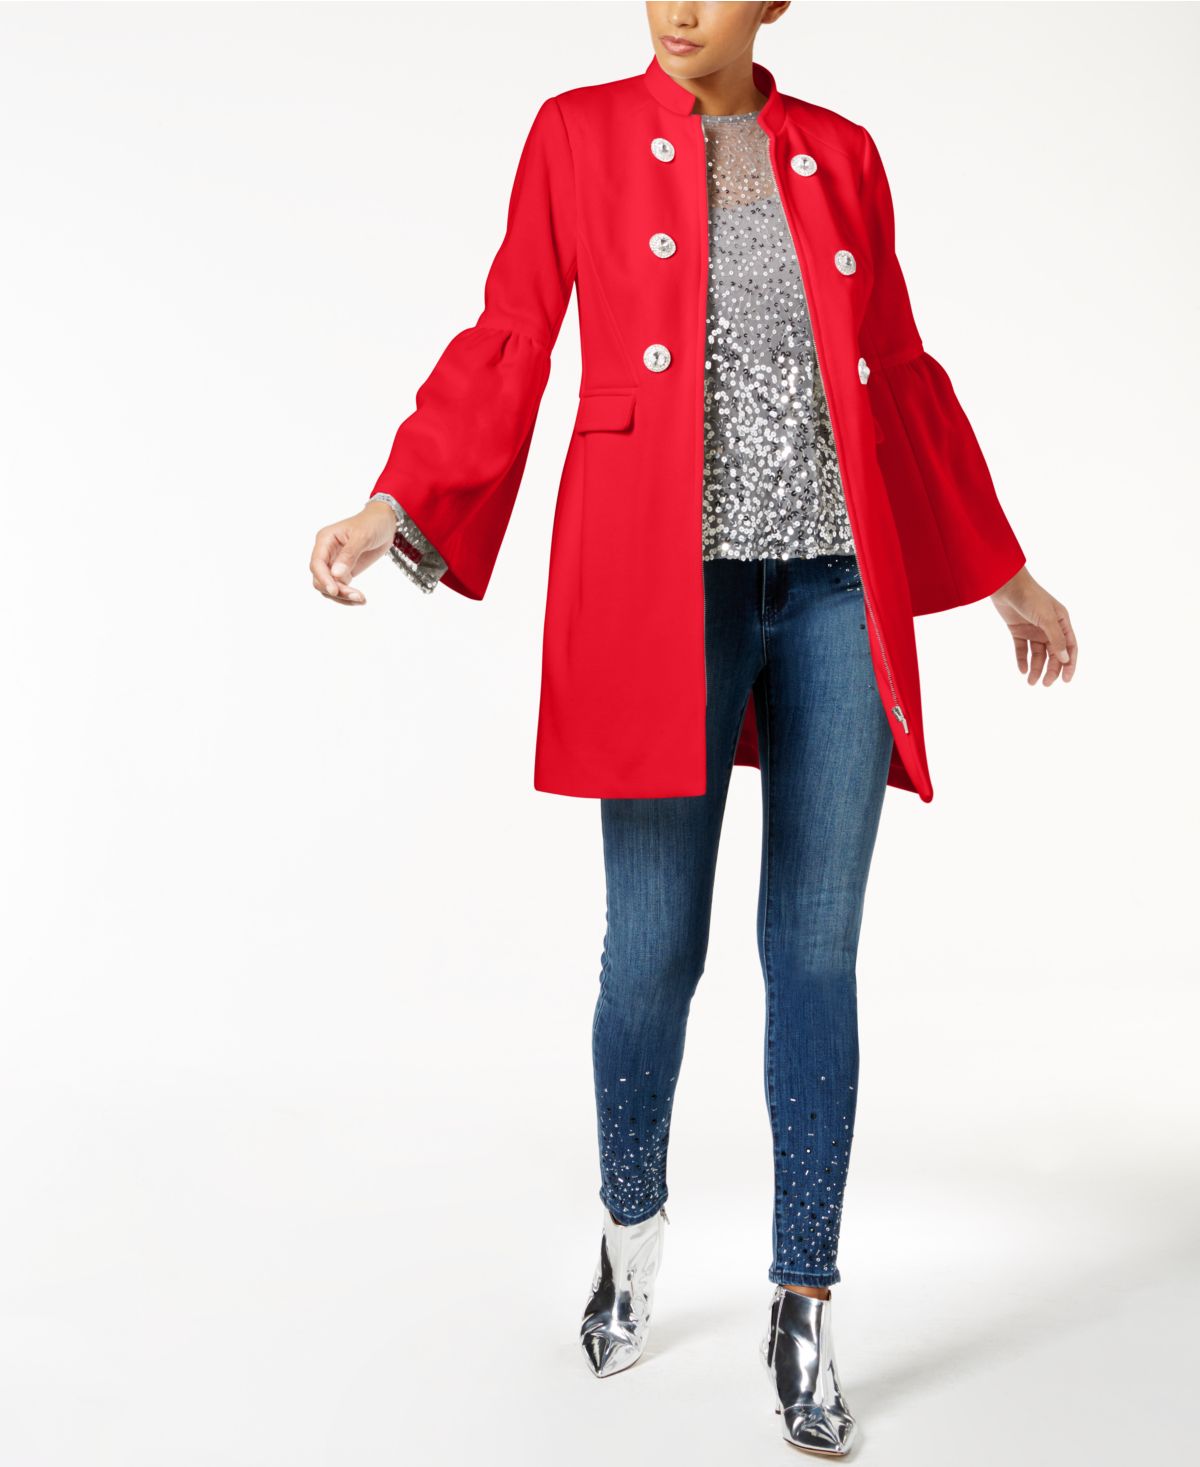 30 Days of Outfit Ideas: The Colorful Coat + Skinny Pants - Nada Manley -  Fun with Fashion Over 40